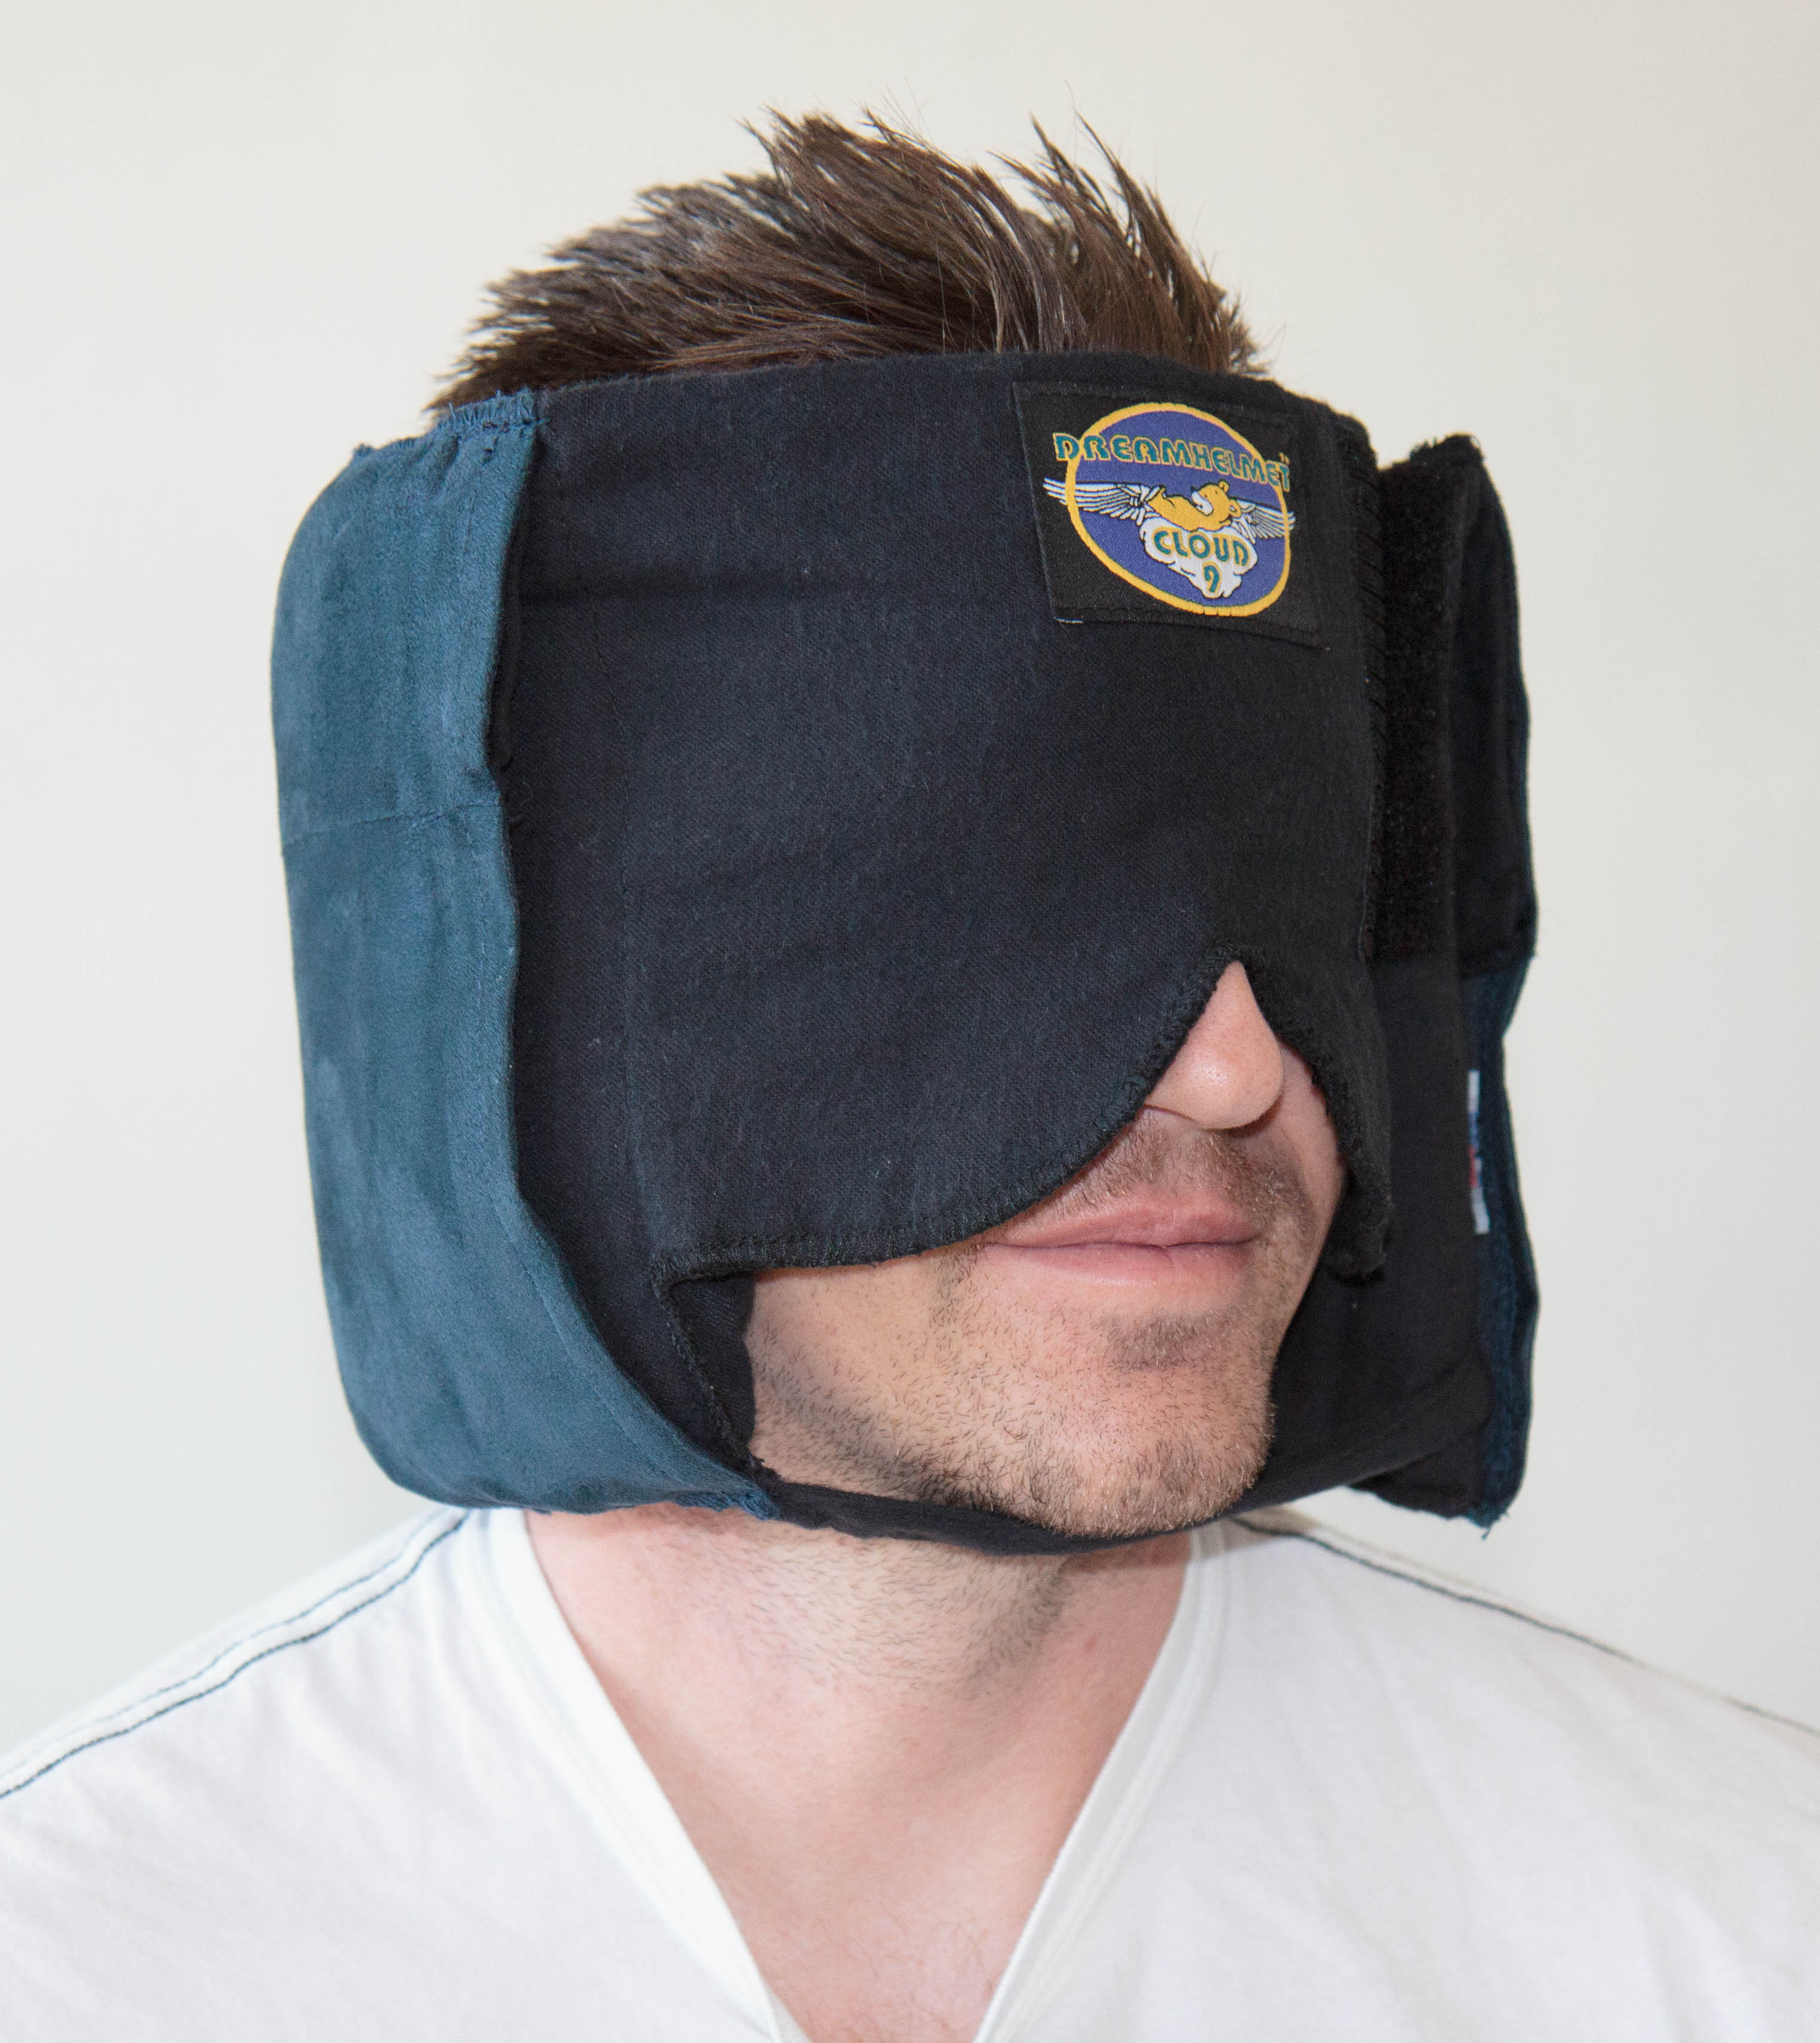 How The Dreamhelmet Sleep Mask Became A Notice Board To Solve An Air Travelers Dilemma